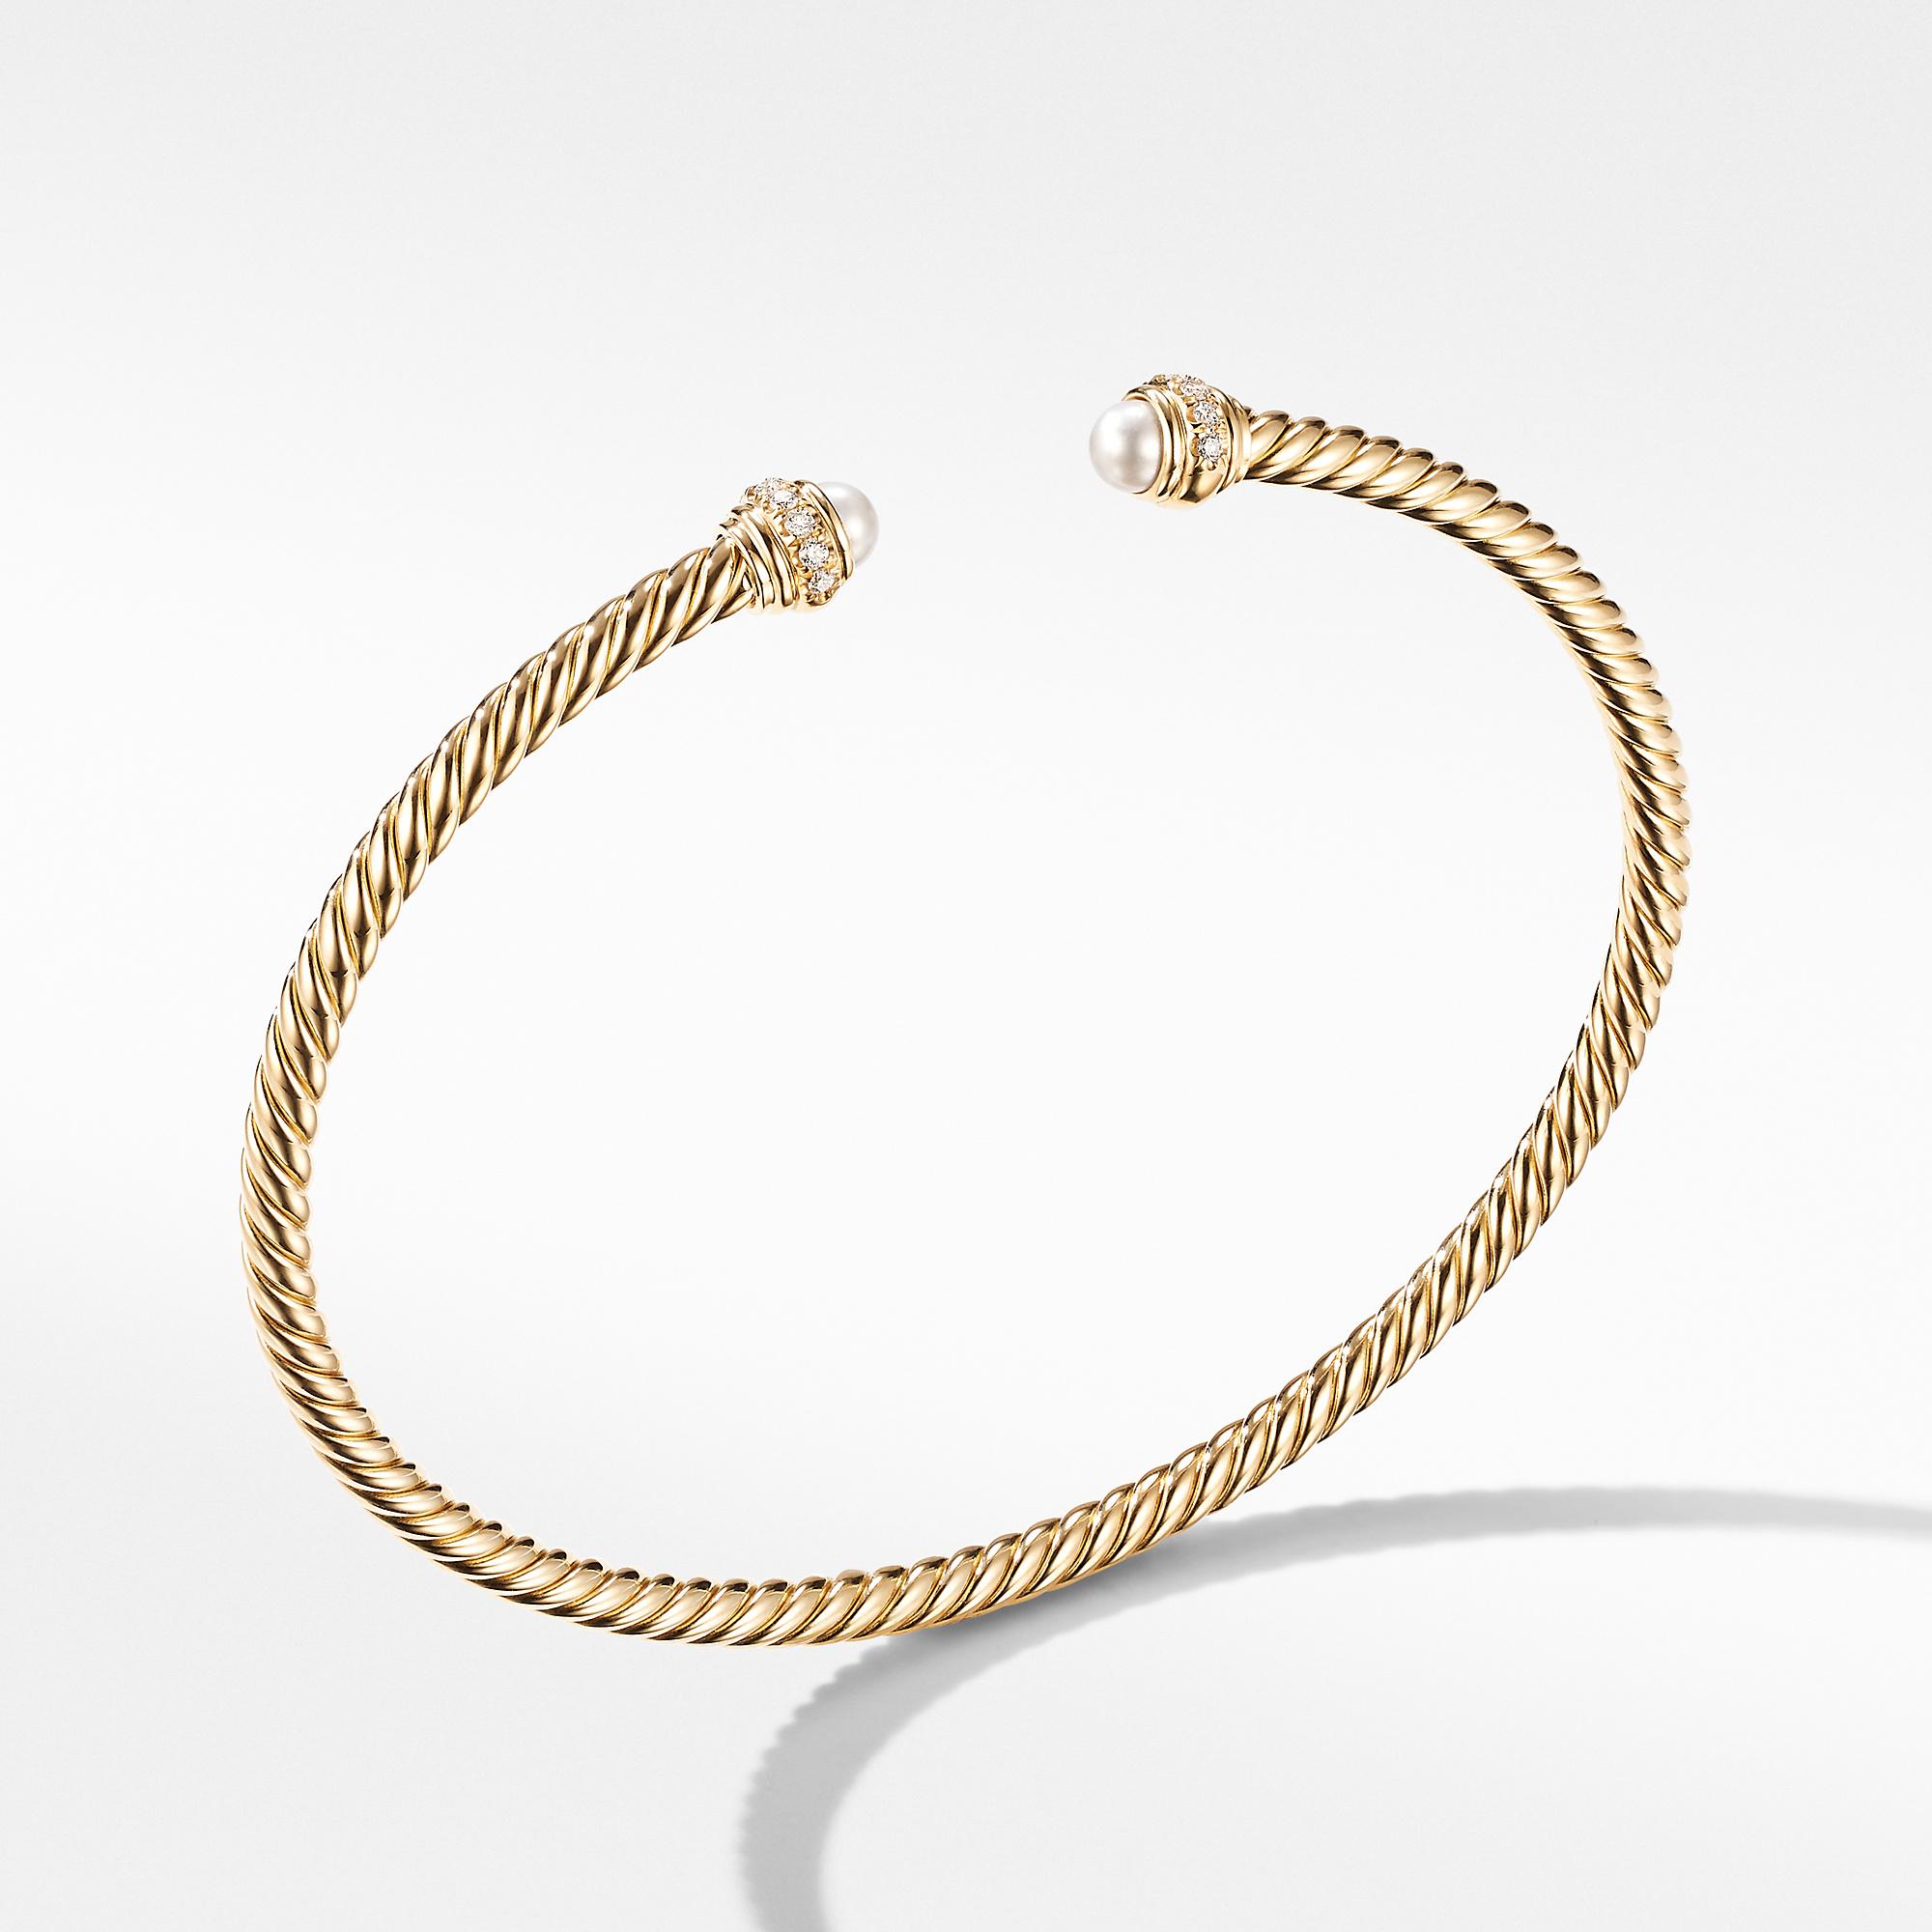 David Yurman Cablespira Bracelet in 18k Yellow Gold with Pearls and Diamonds